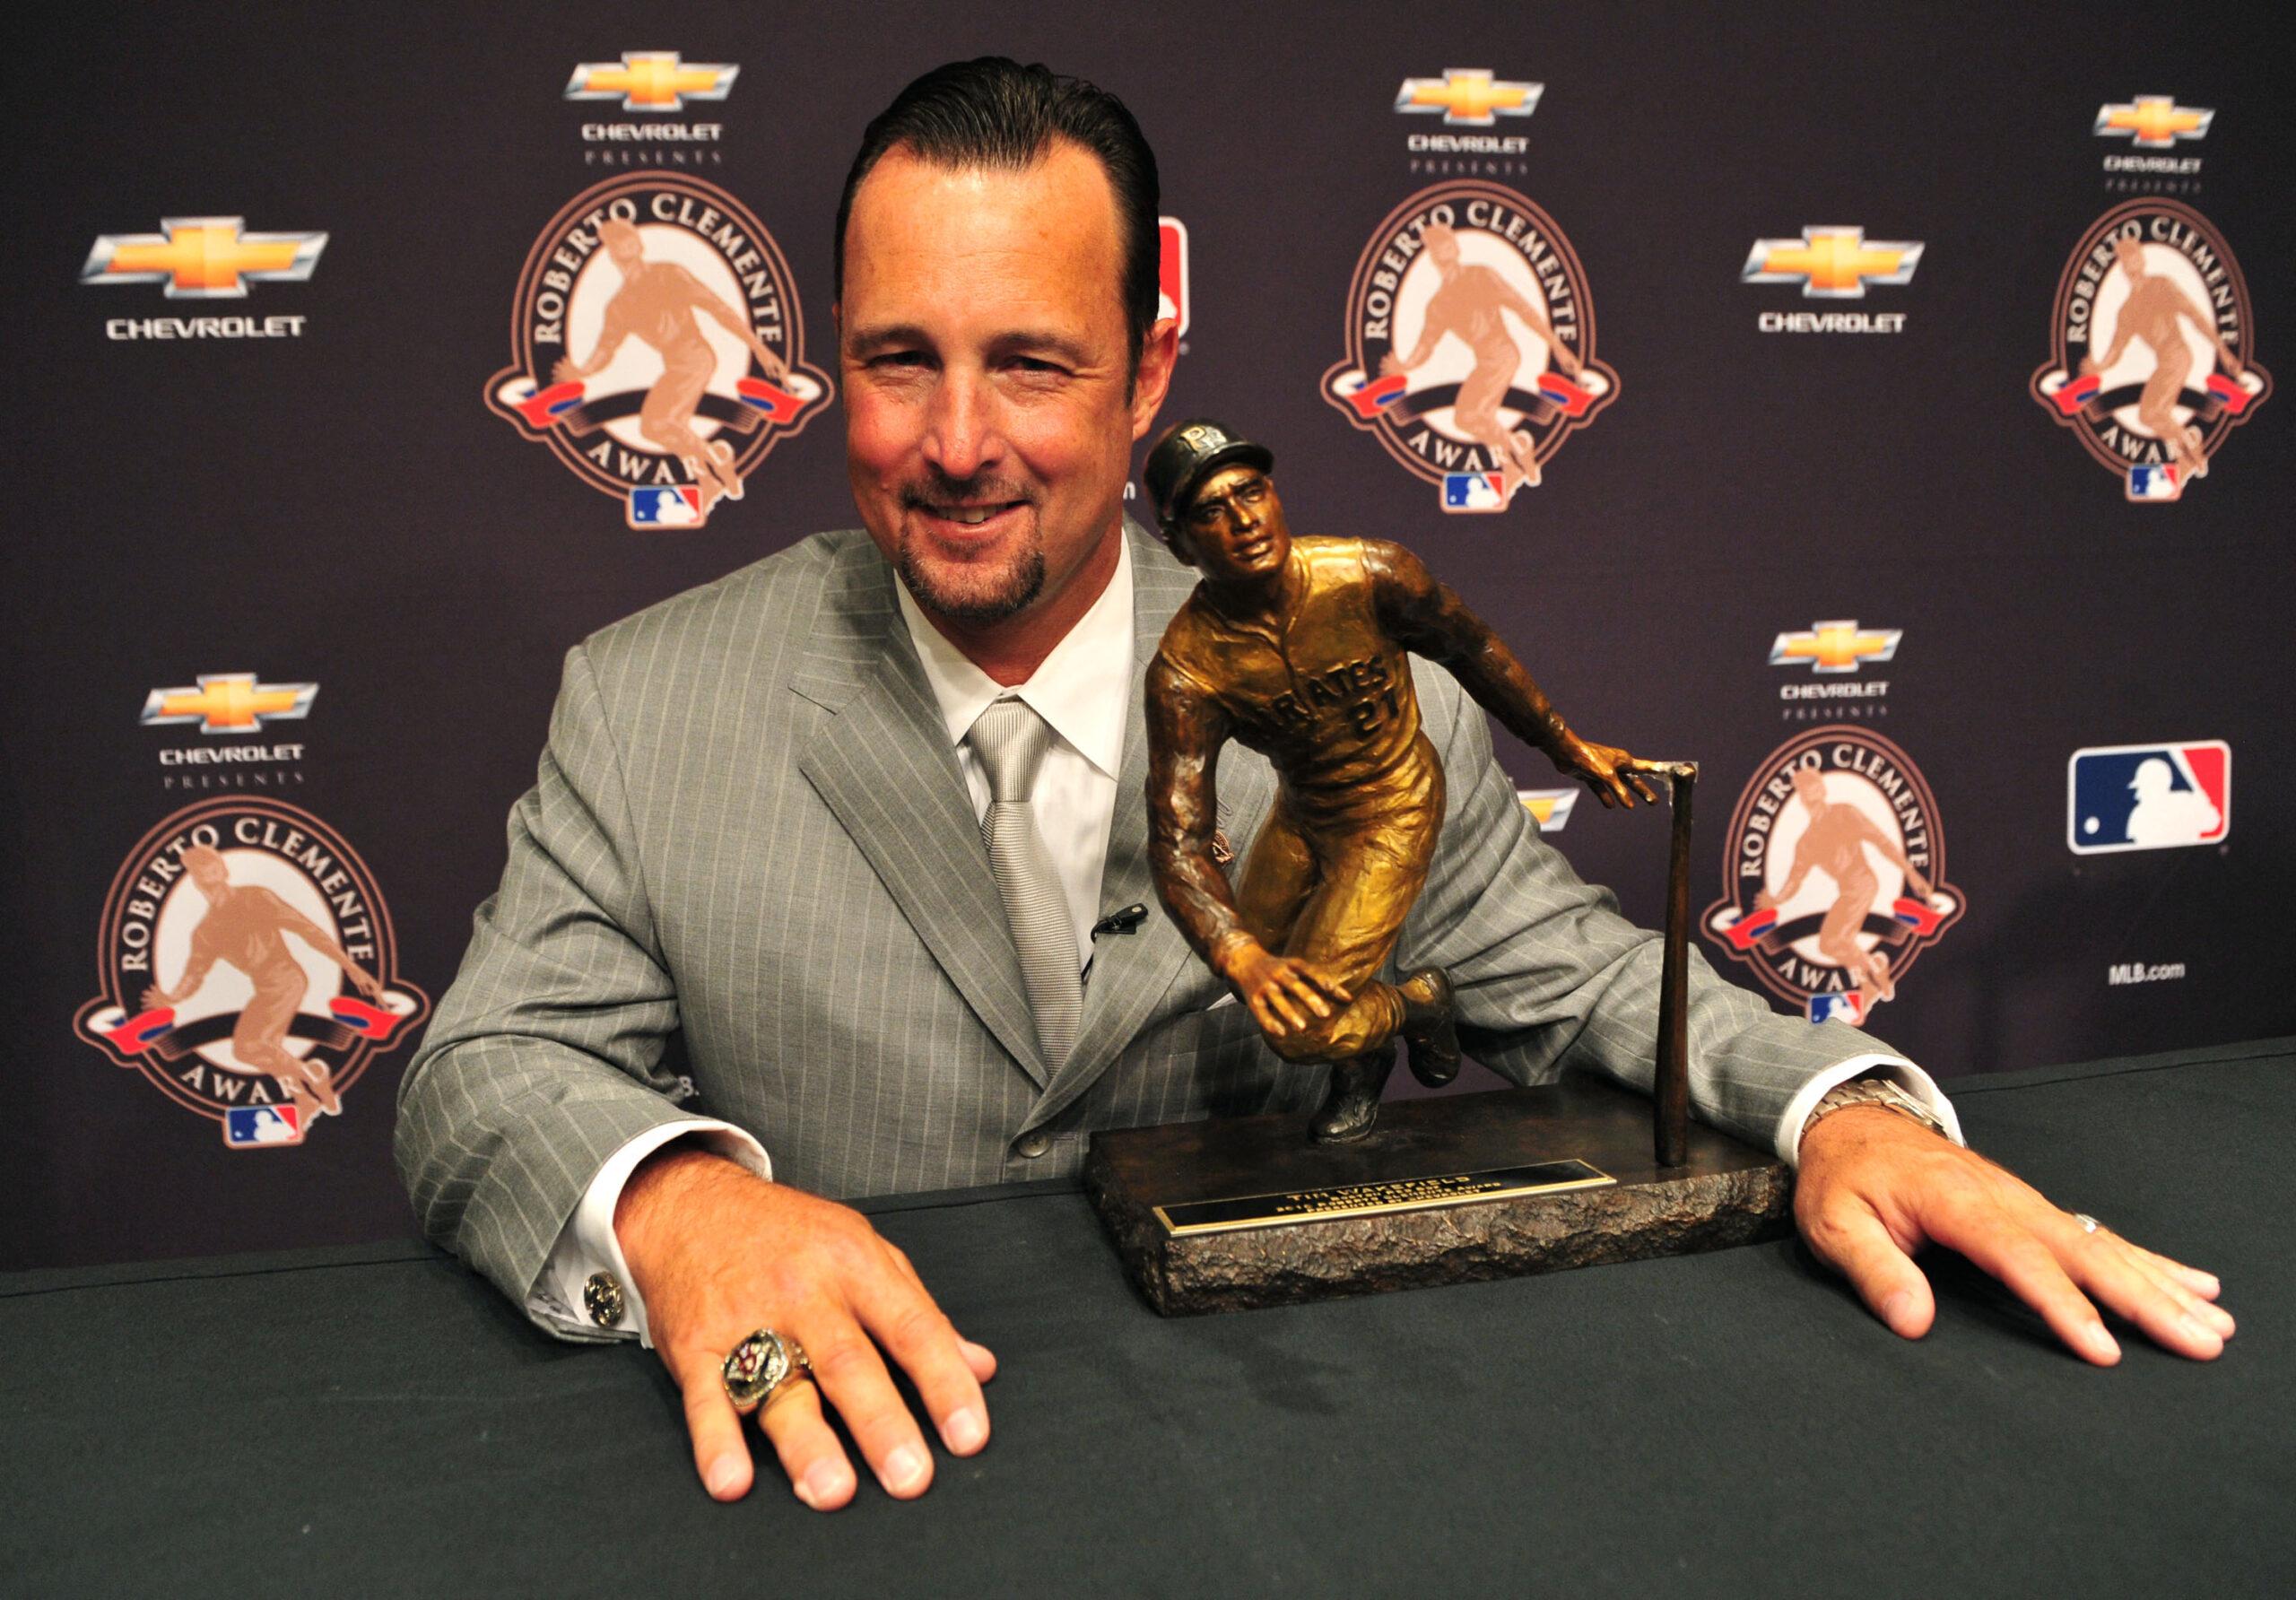 Tim Wakefield's Wife Passes Away 5 Months After MLB Pitcher Dies